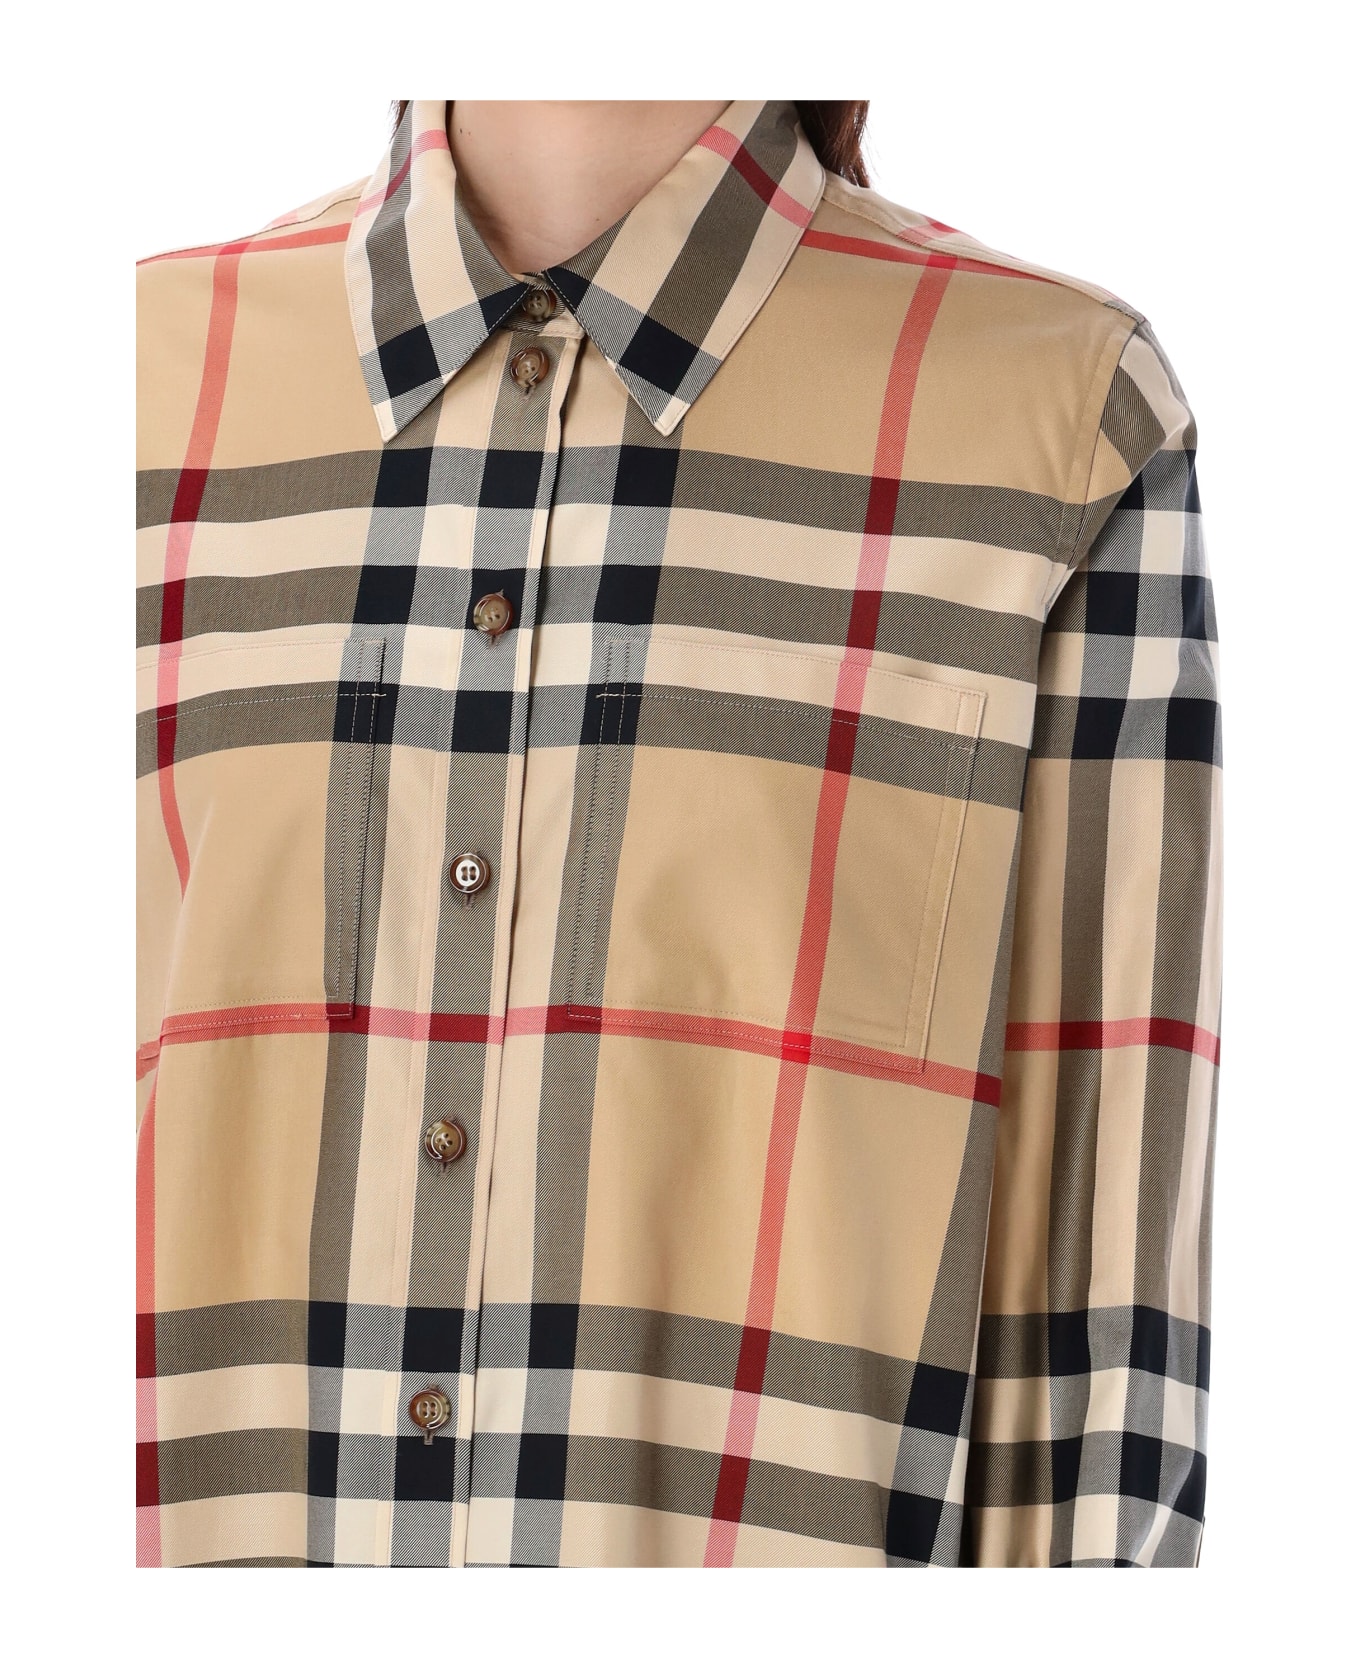 Burberry London Check Shirt - ARCHIVE BEIGE IP CHK シャツ